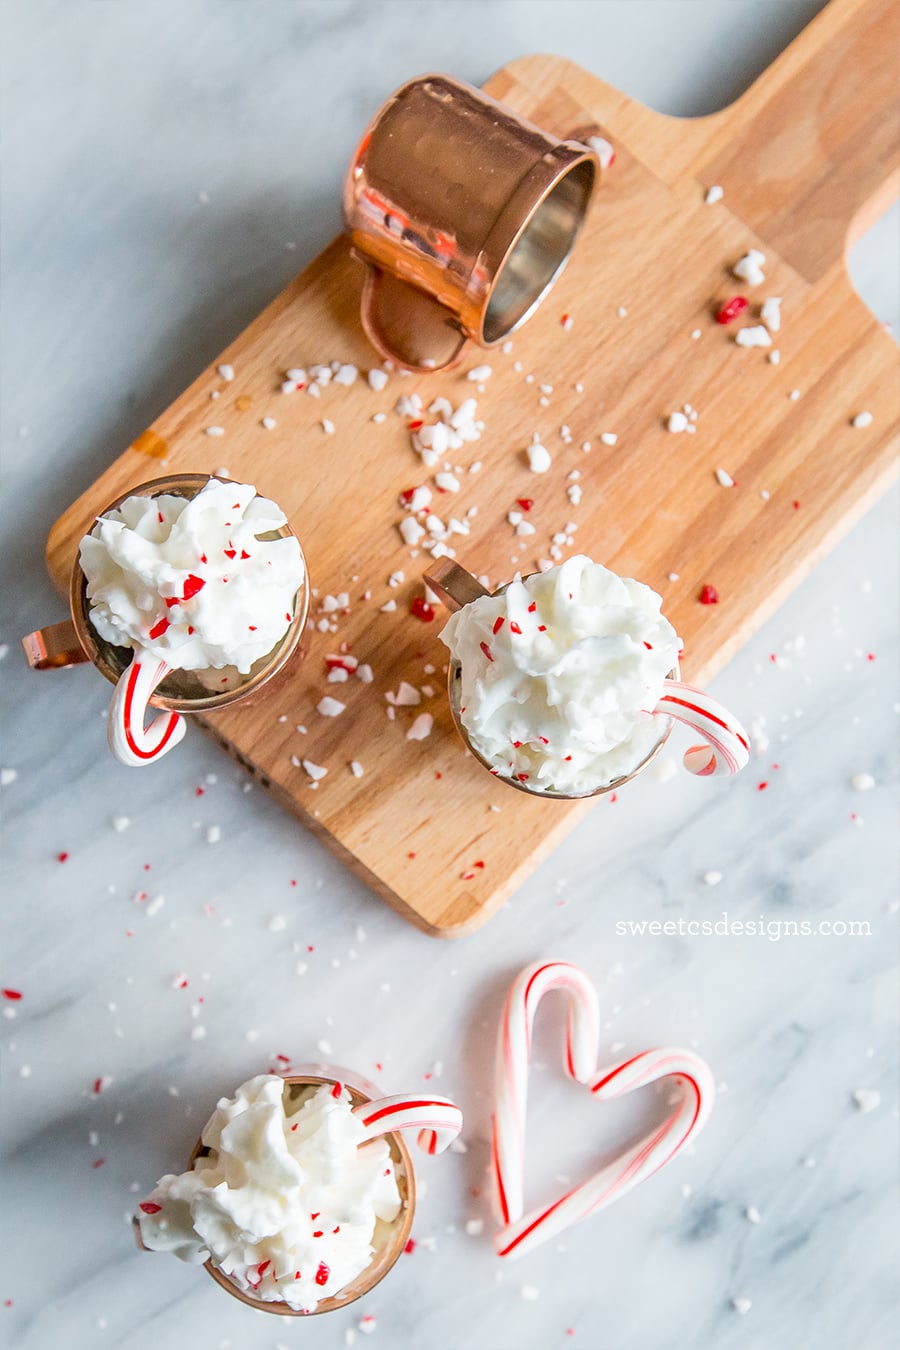 Love this hot cocoa shooters recipe- so fun!